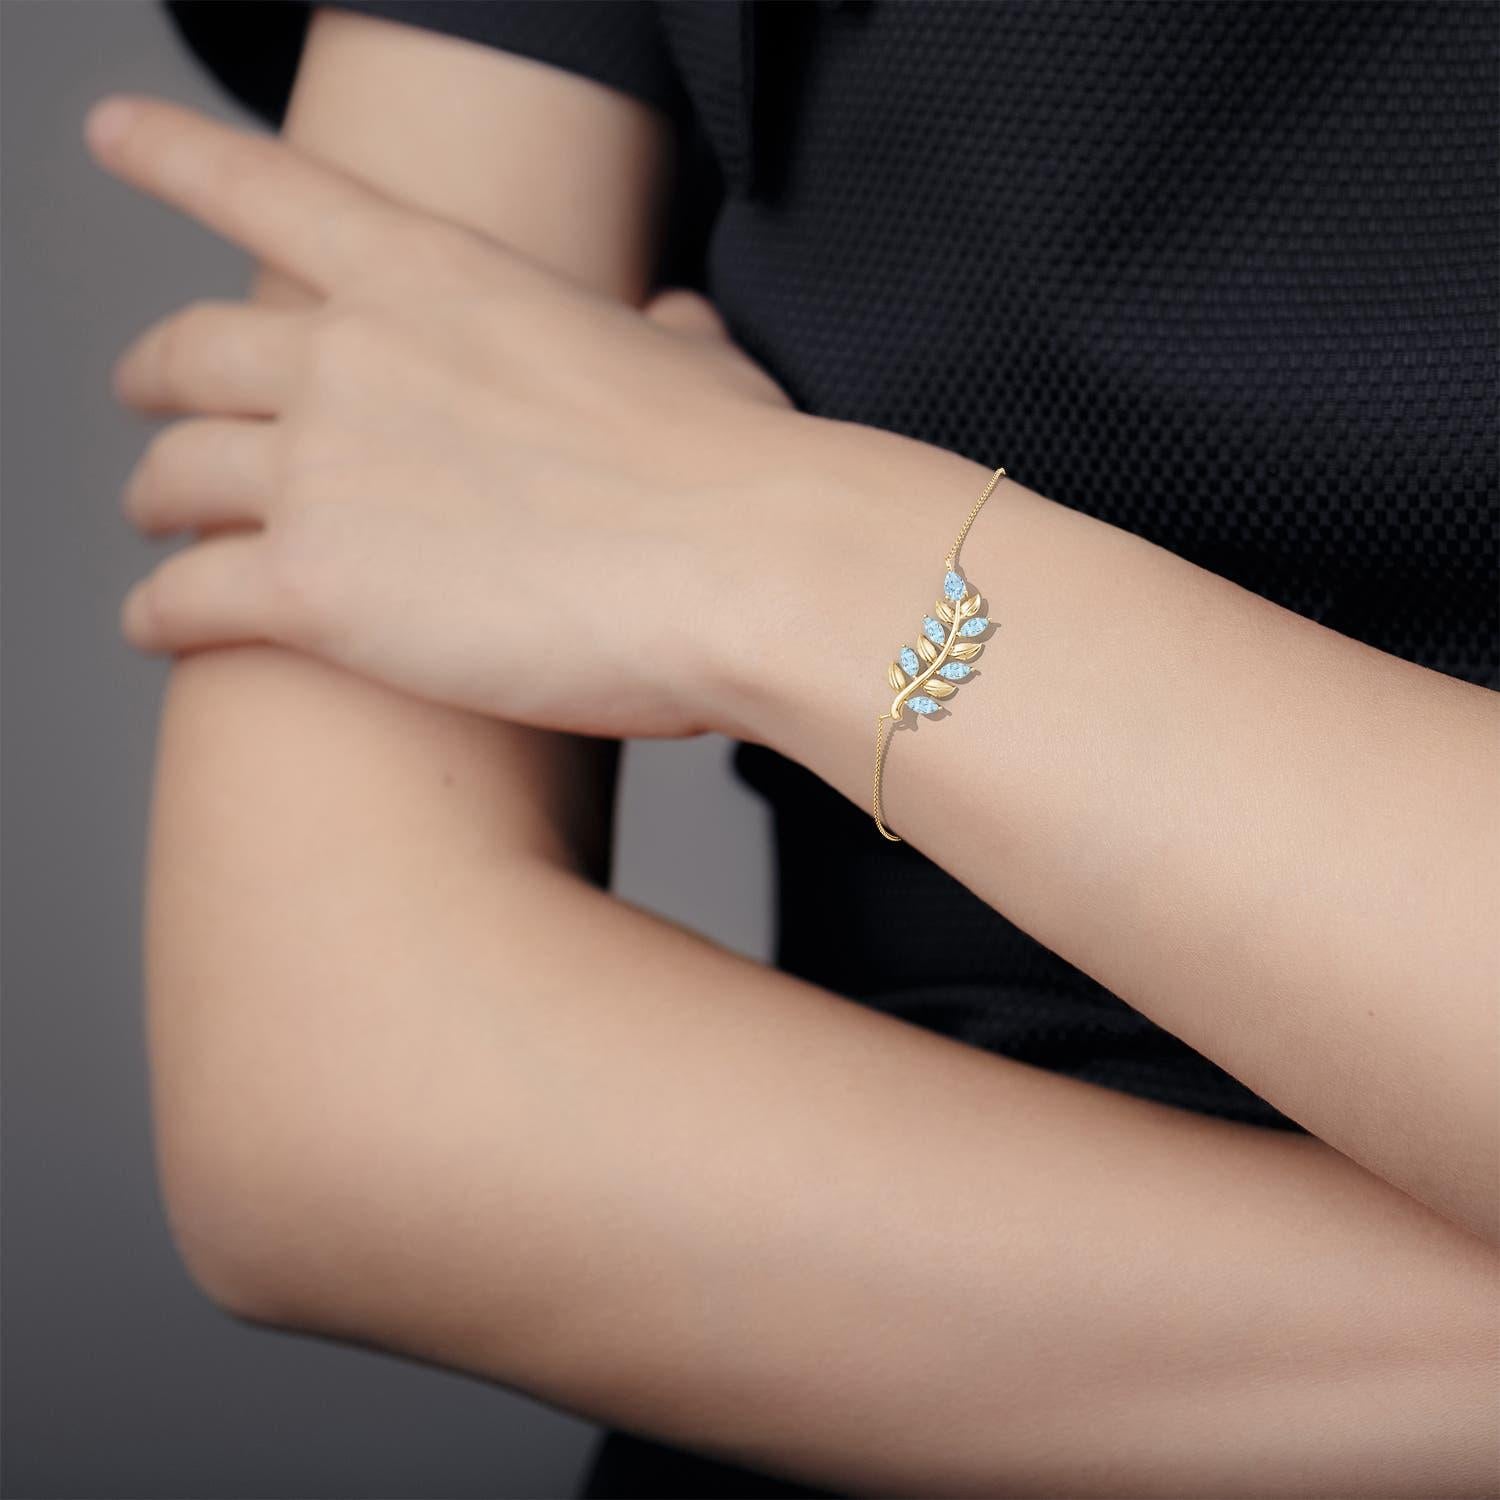 This olive branch bracelet is a stunning symbol of peace and victory. It showcases pear-shaped and marquise aquamarines that exude an icy blue hue. The leaf motifs enhance the overall allure of this 14k yellow gold bracelet.